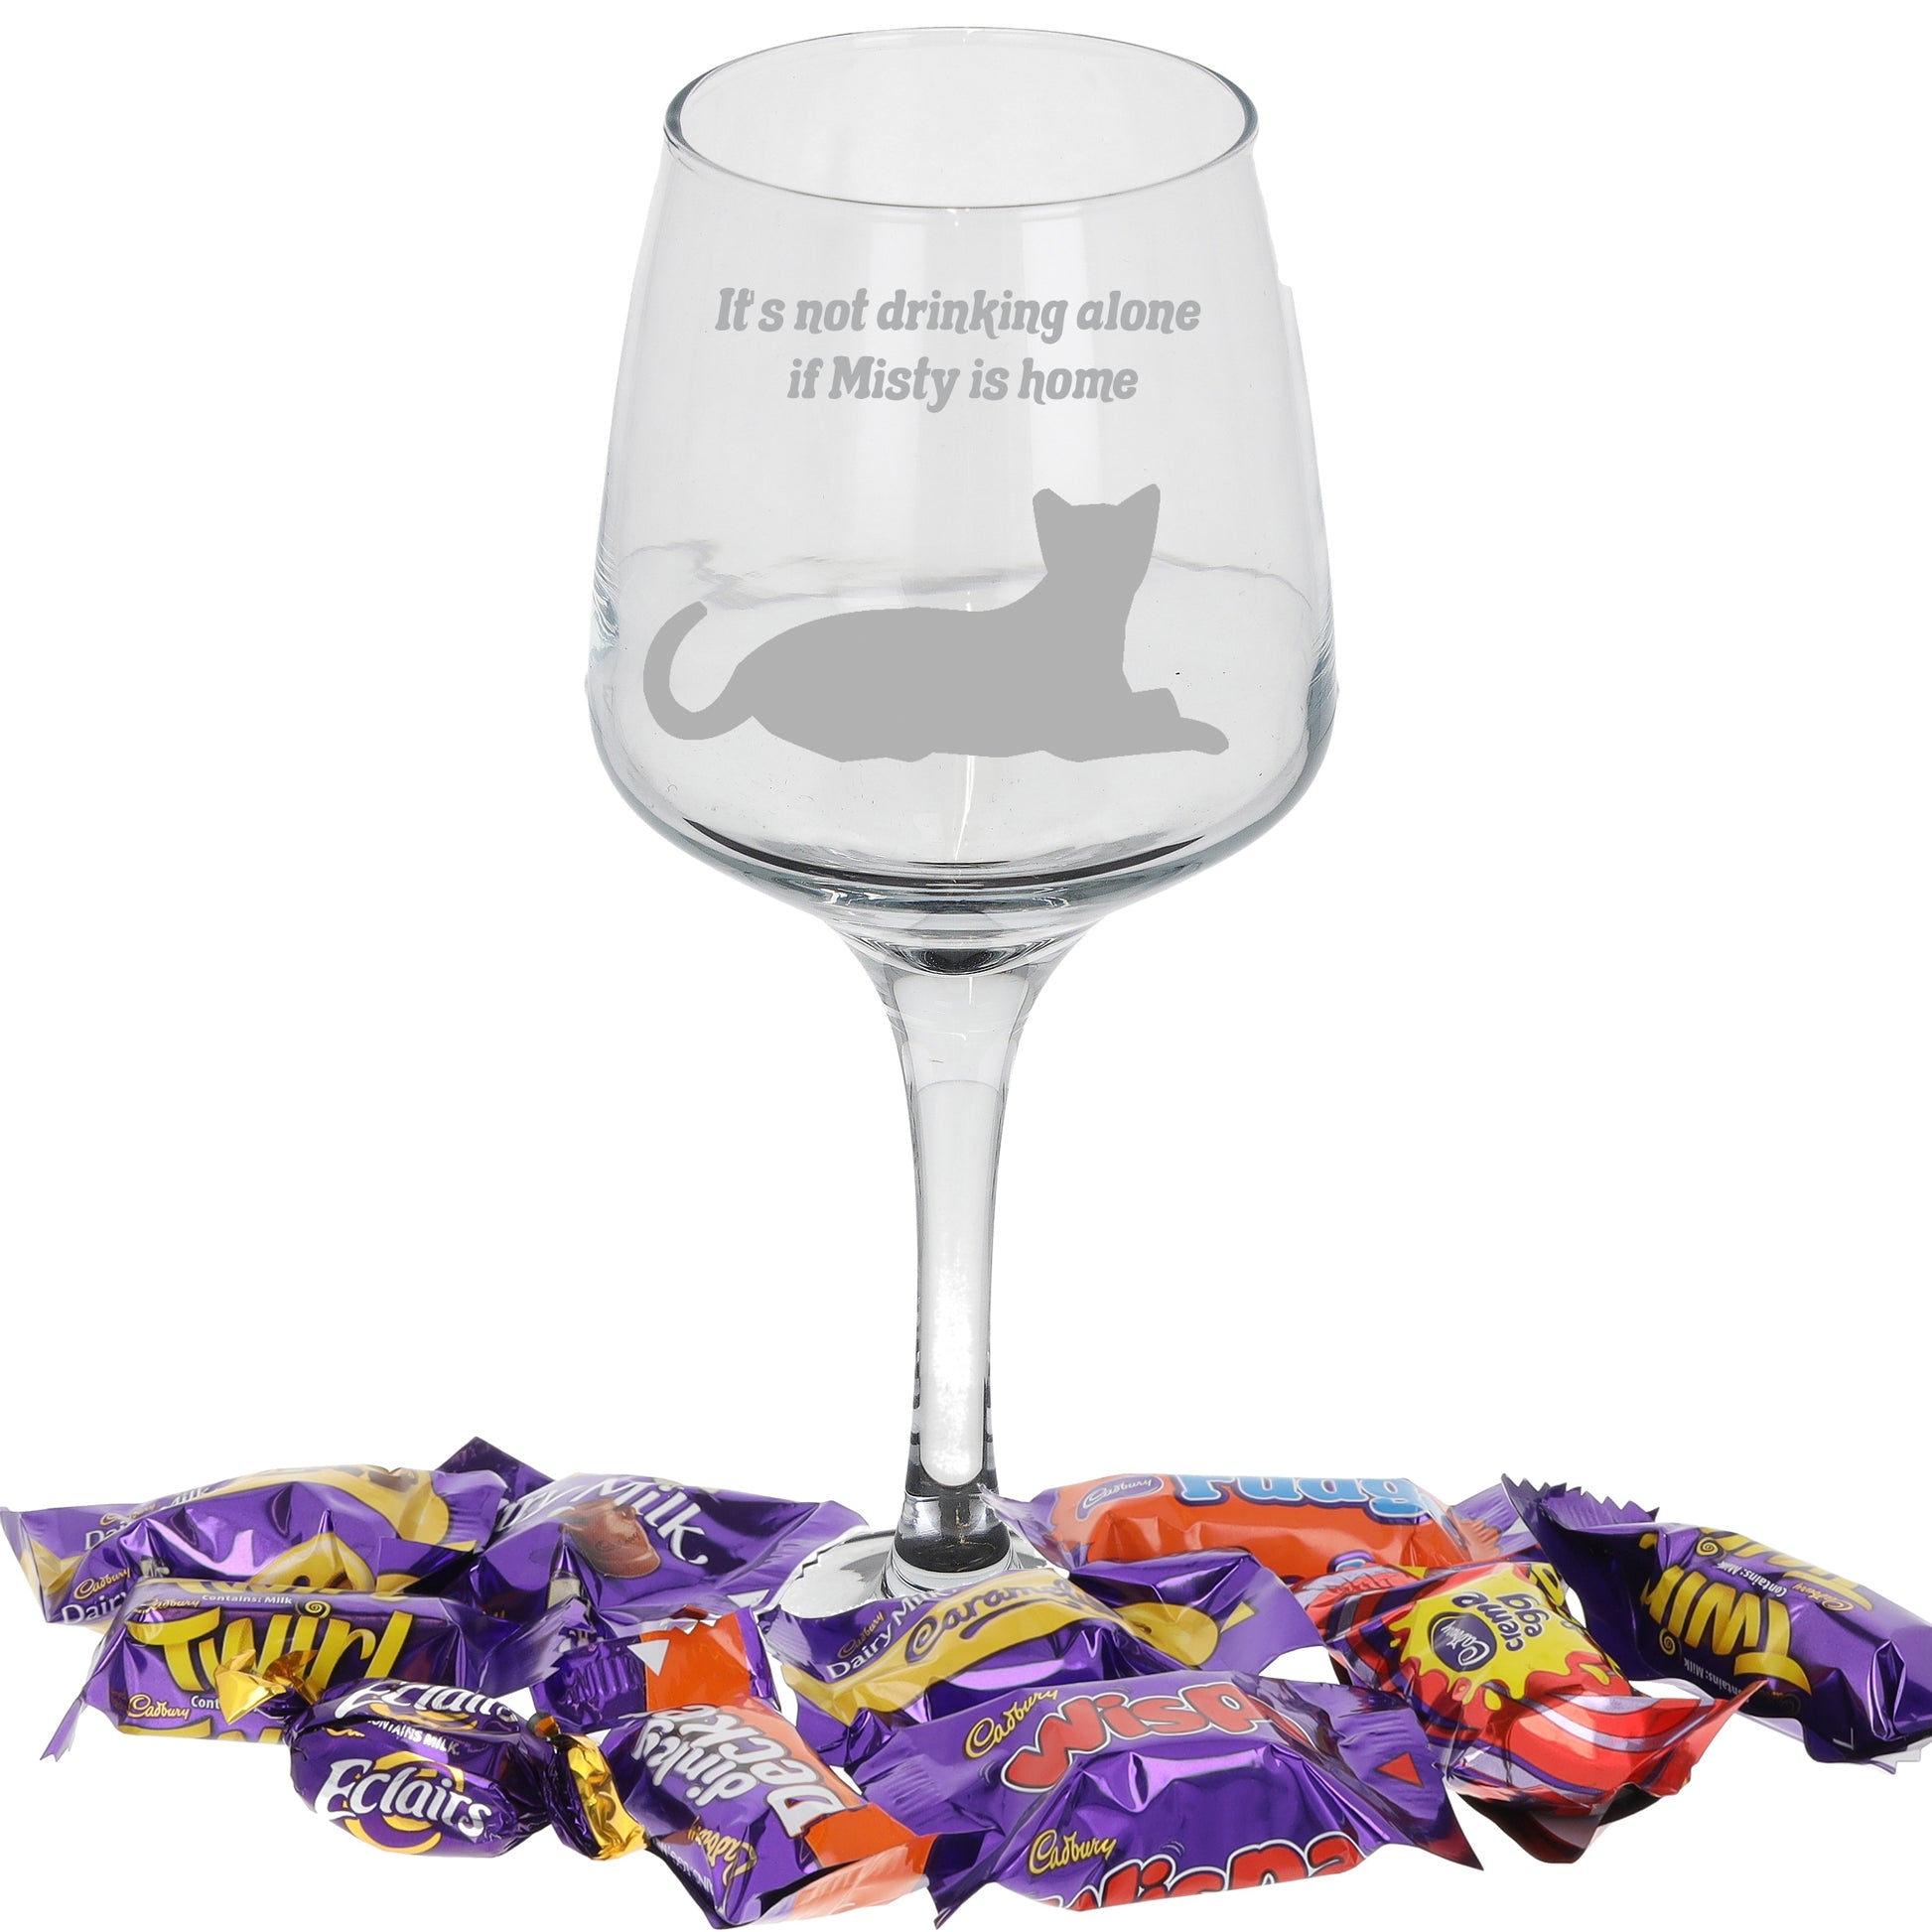 Engraved Personalised Cat Lover Wine Glass Gift  - Always Looking Good -   